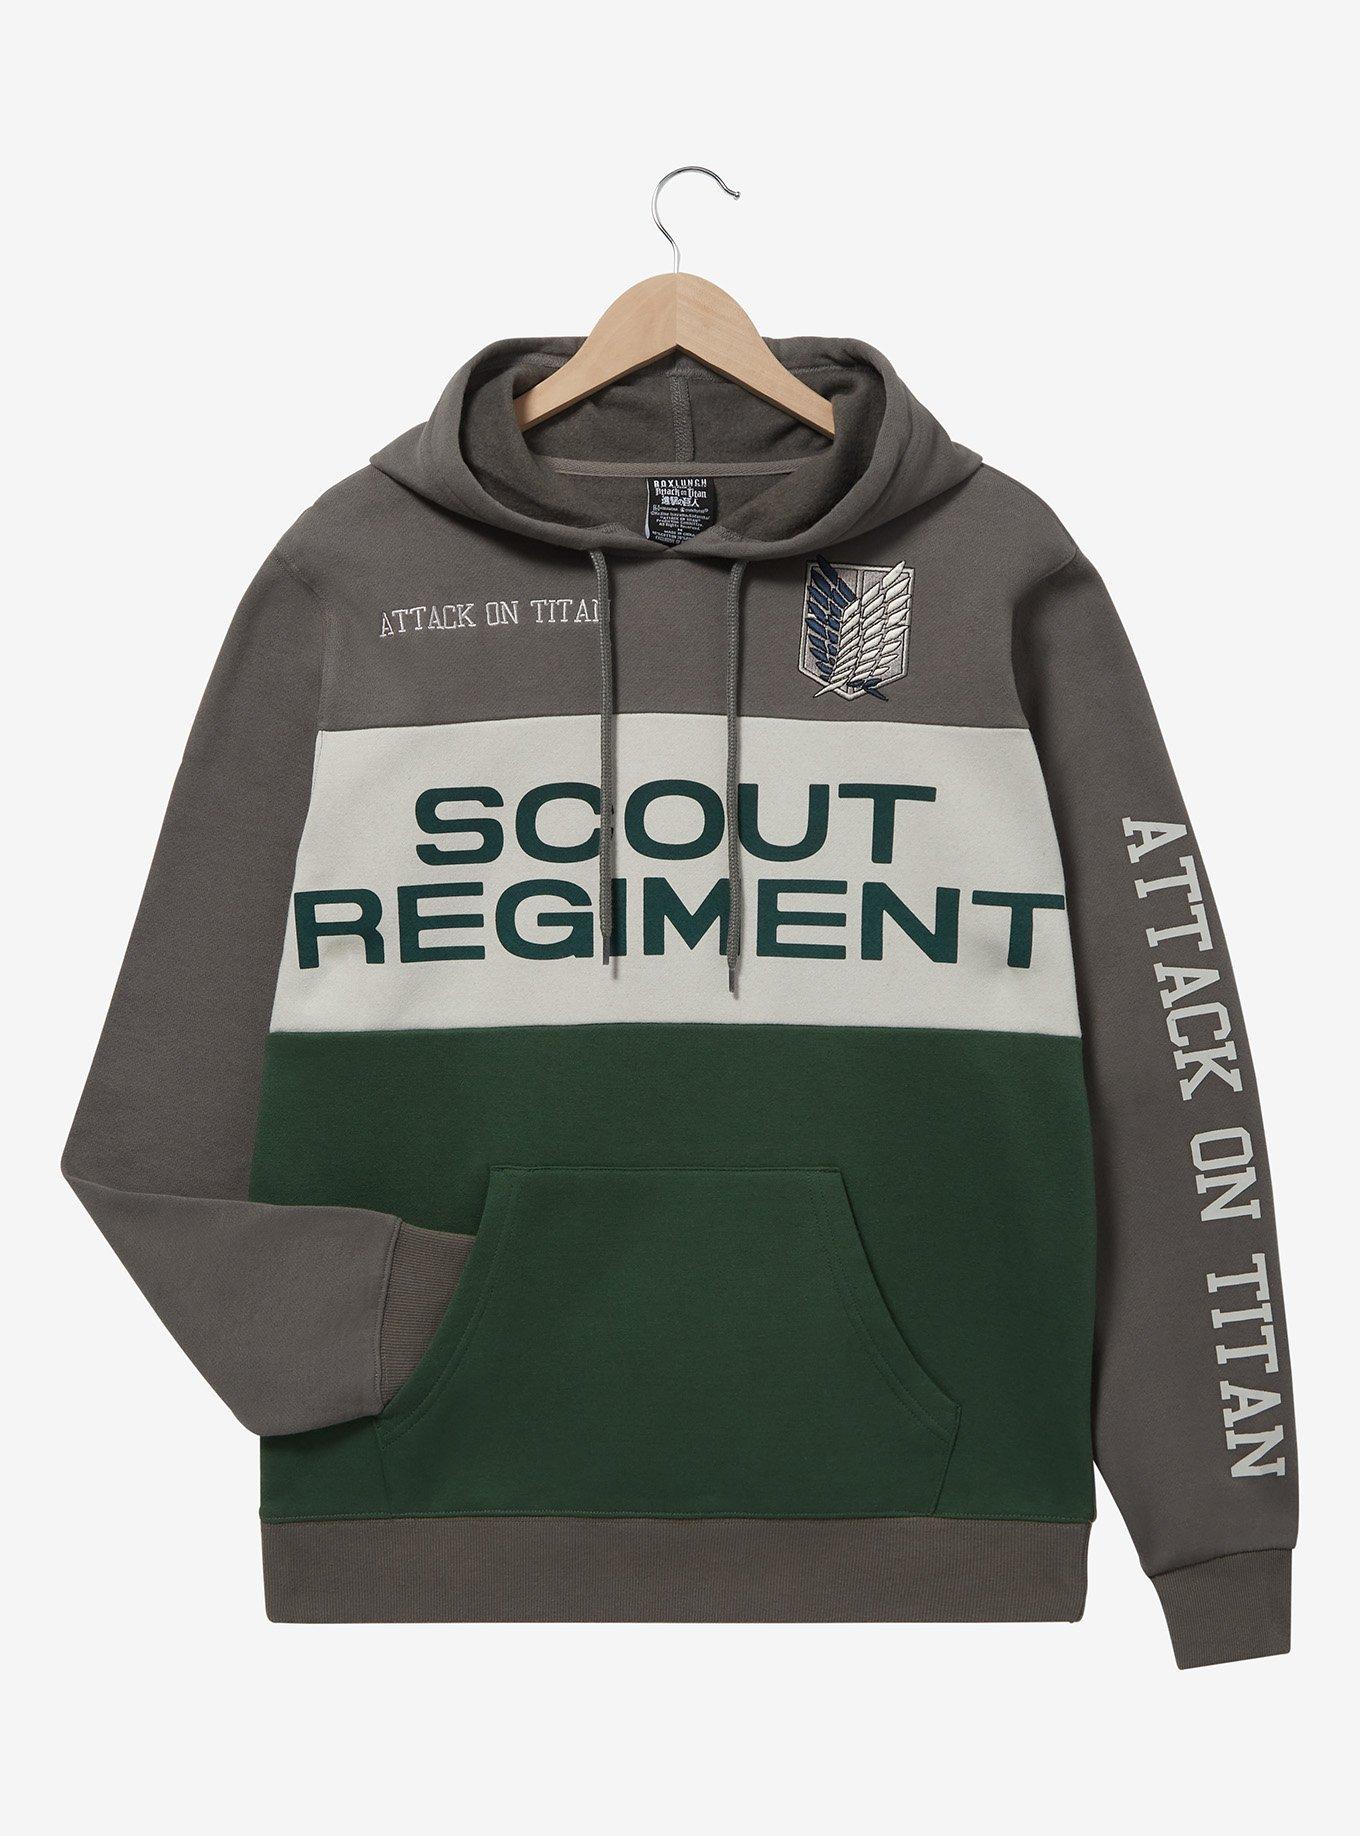 Attack on Titan Scout Regiment Panel Hoodie - BoxLunch Exclusive, GREEN, hi-res